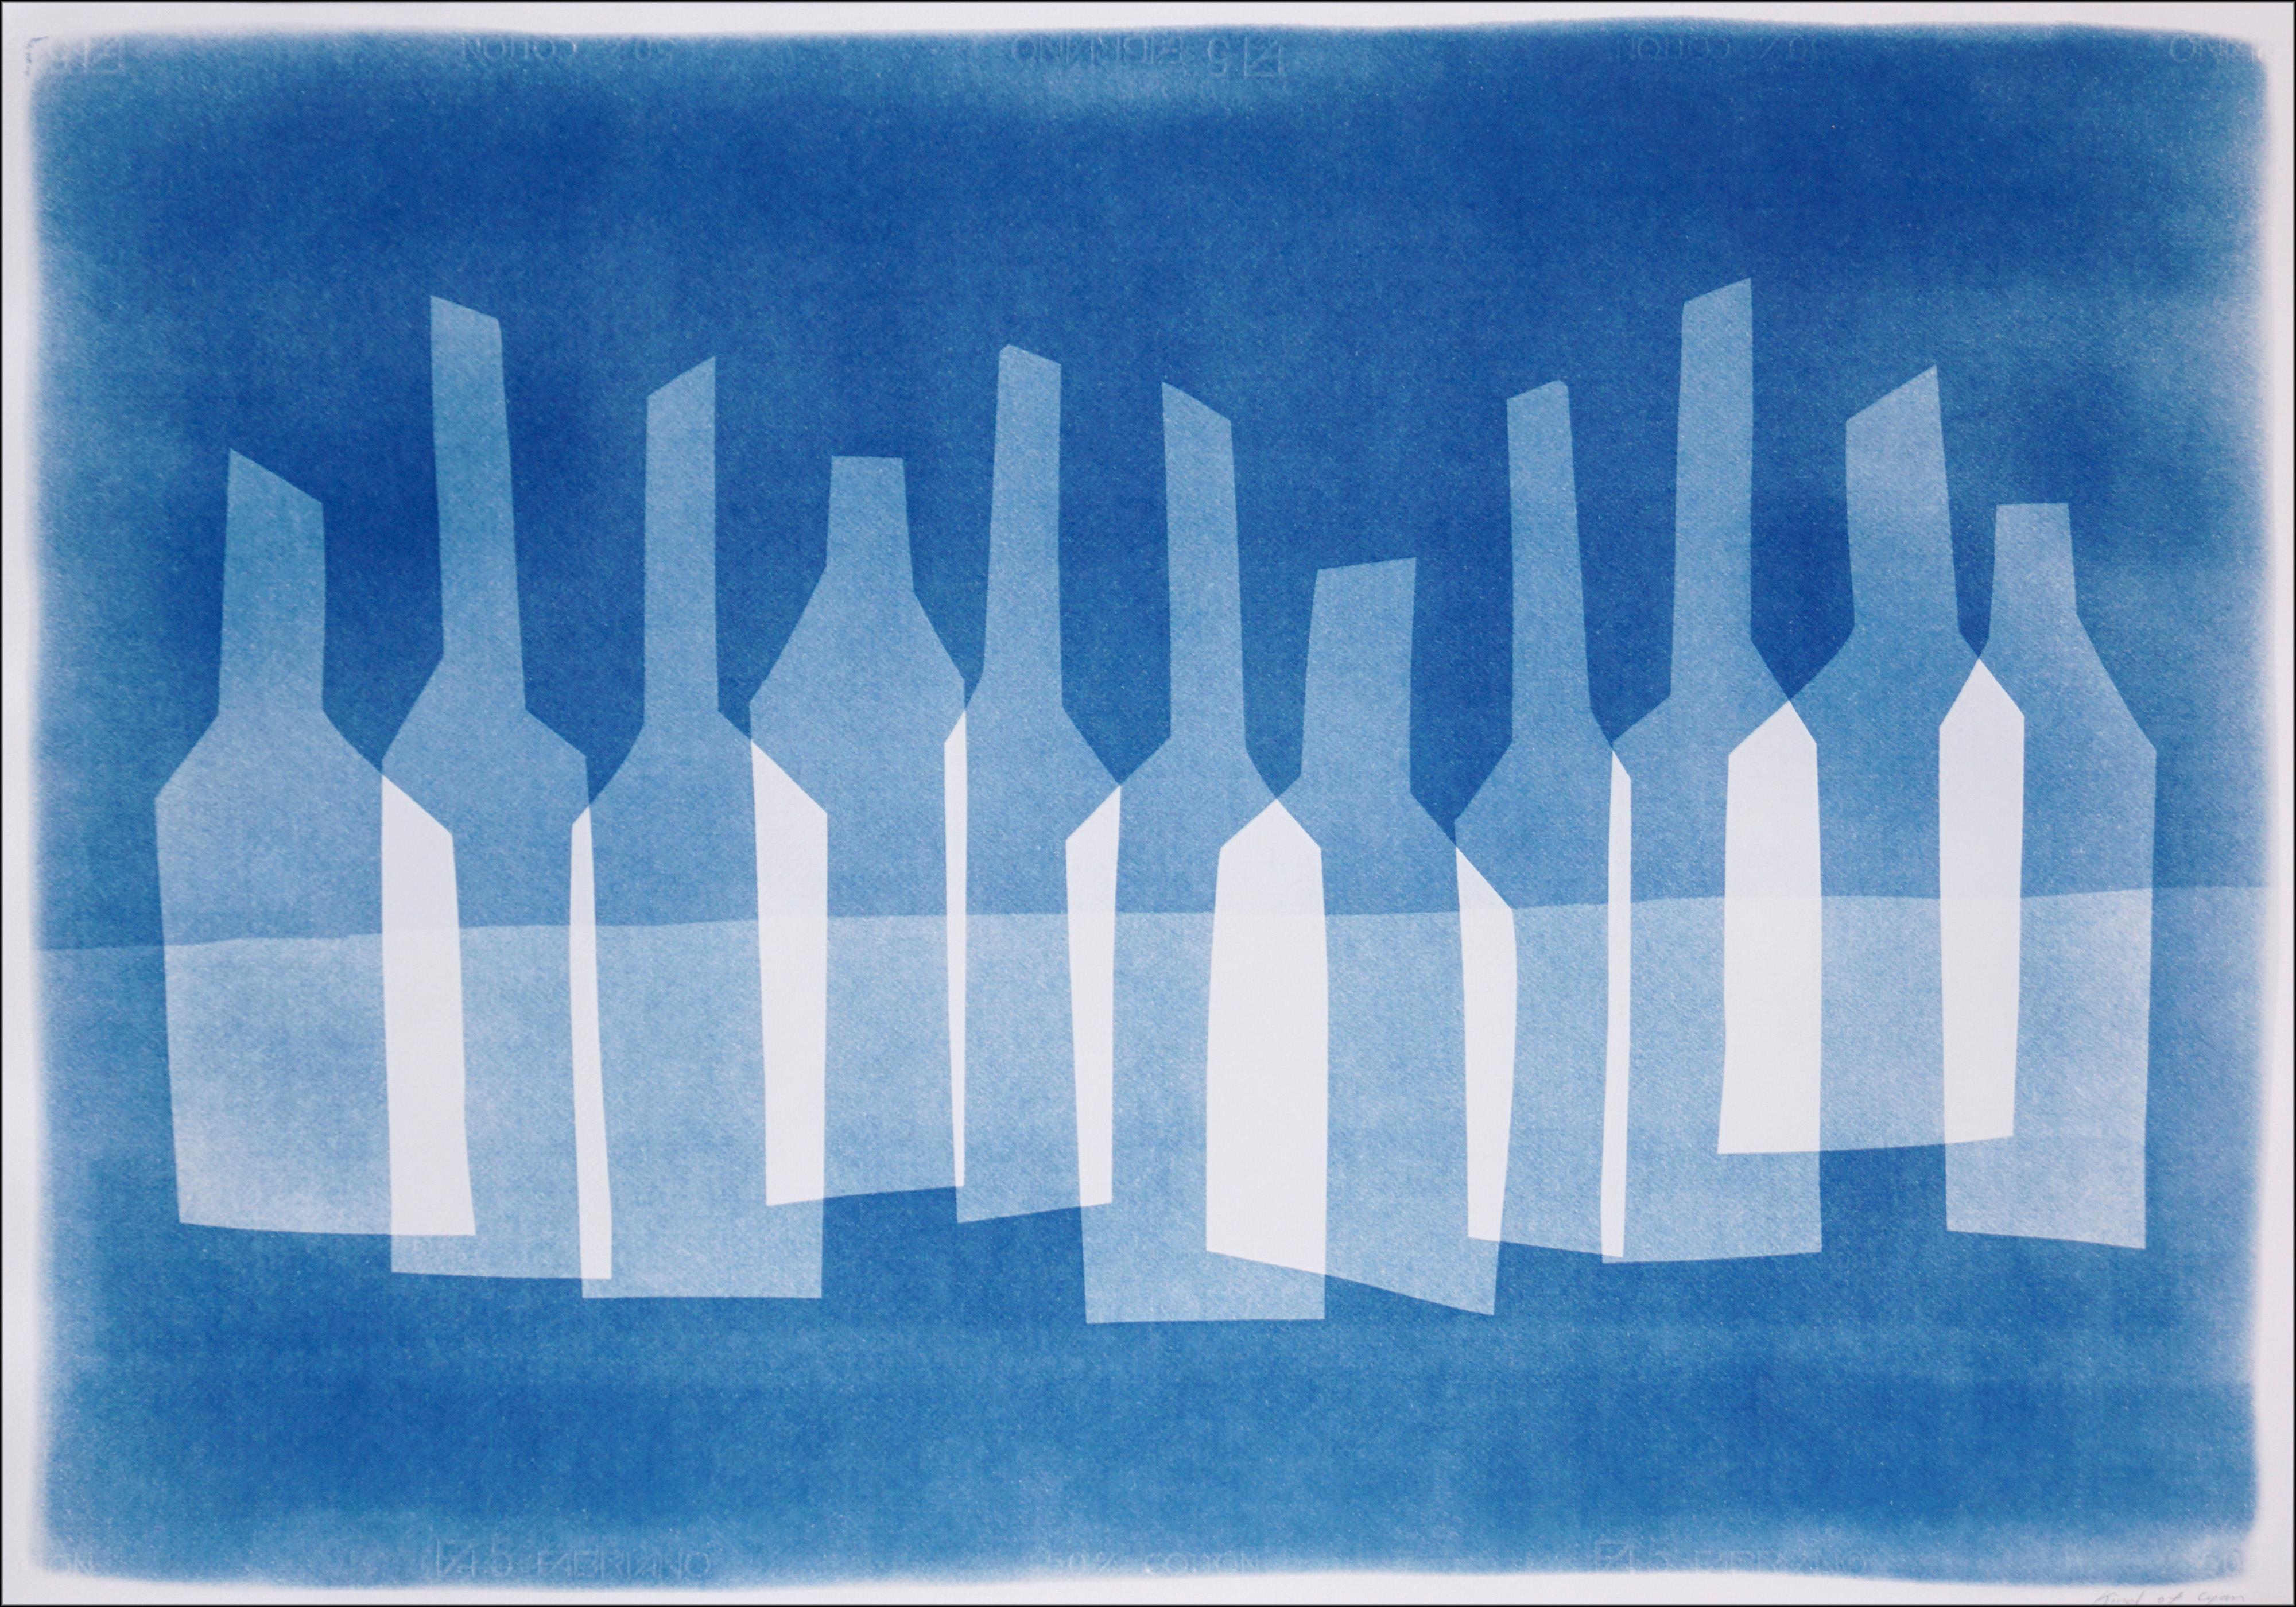 Kind of Cyan Still-Life Print - Wine Cellar Still Life in Blue Tones, Abstract Bottles Composition, Cyanotype